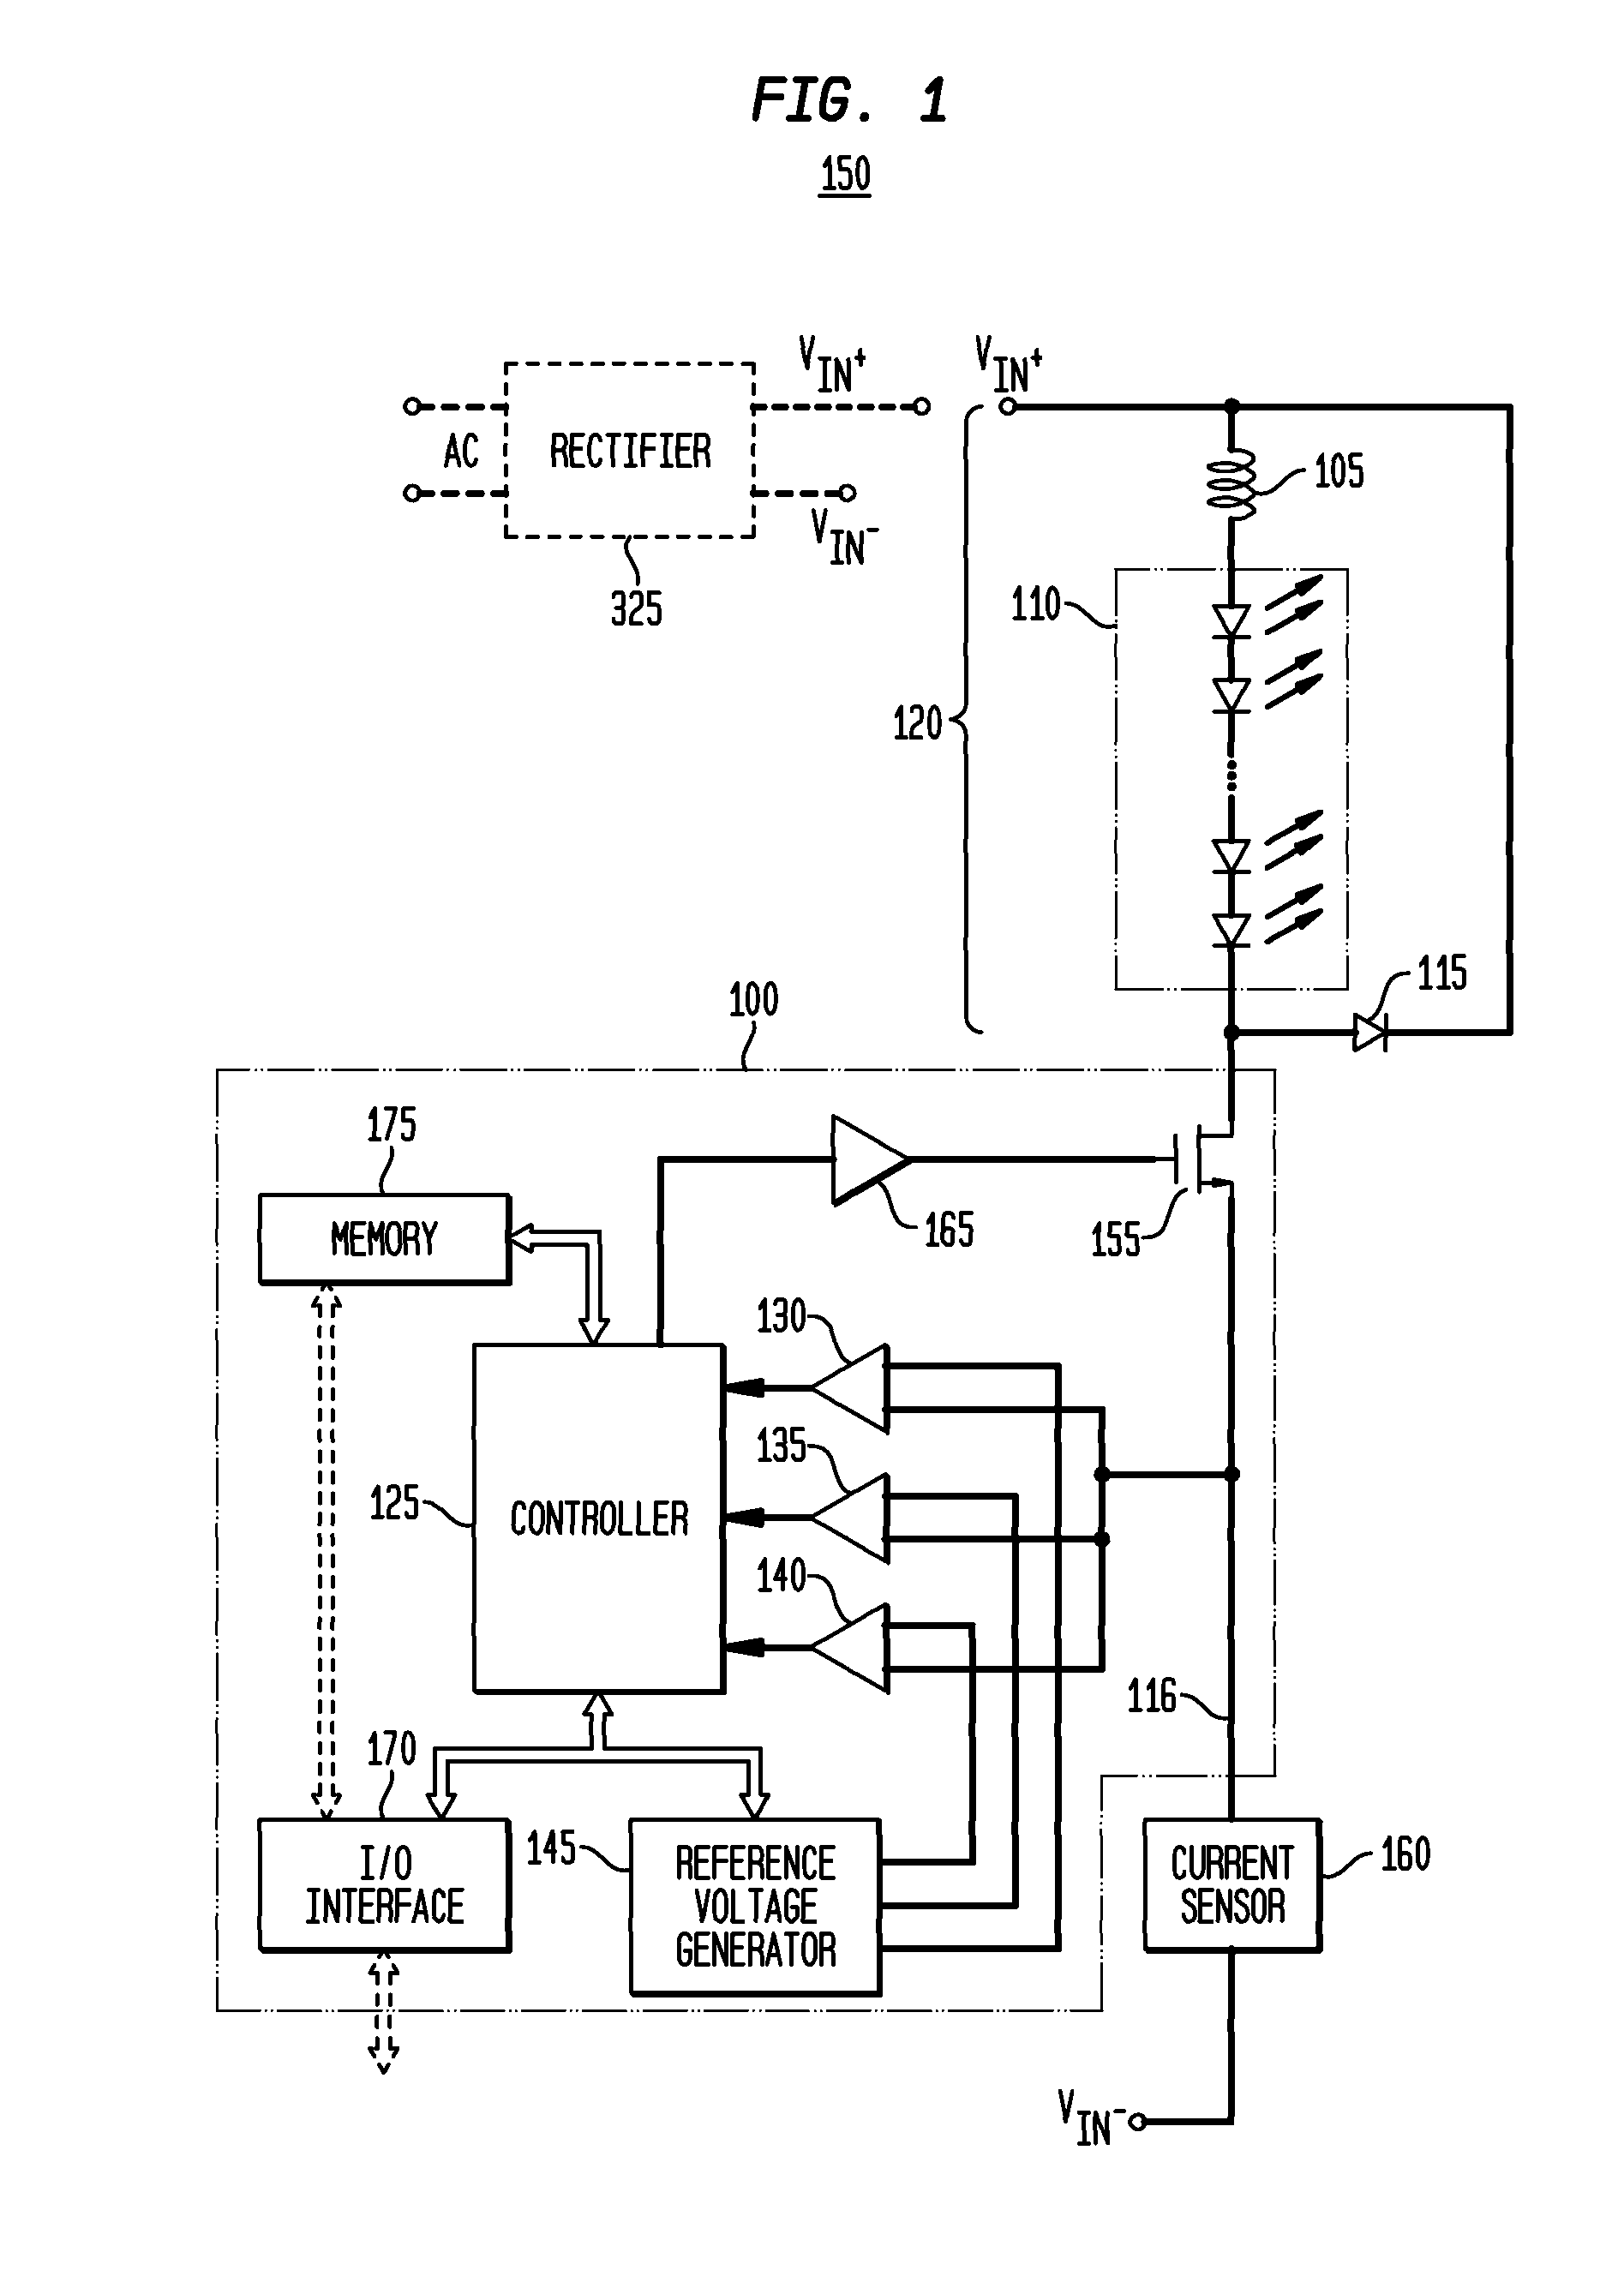 Digital driver apparatus, method and system for solid state lighting